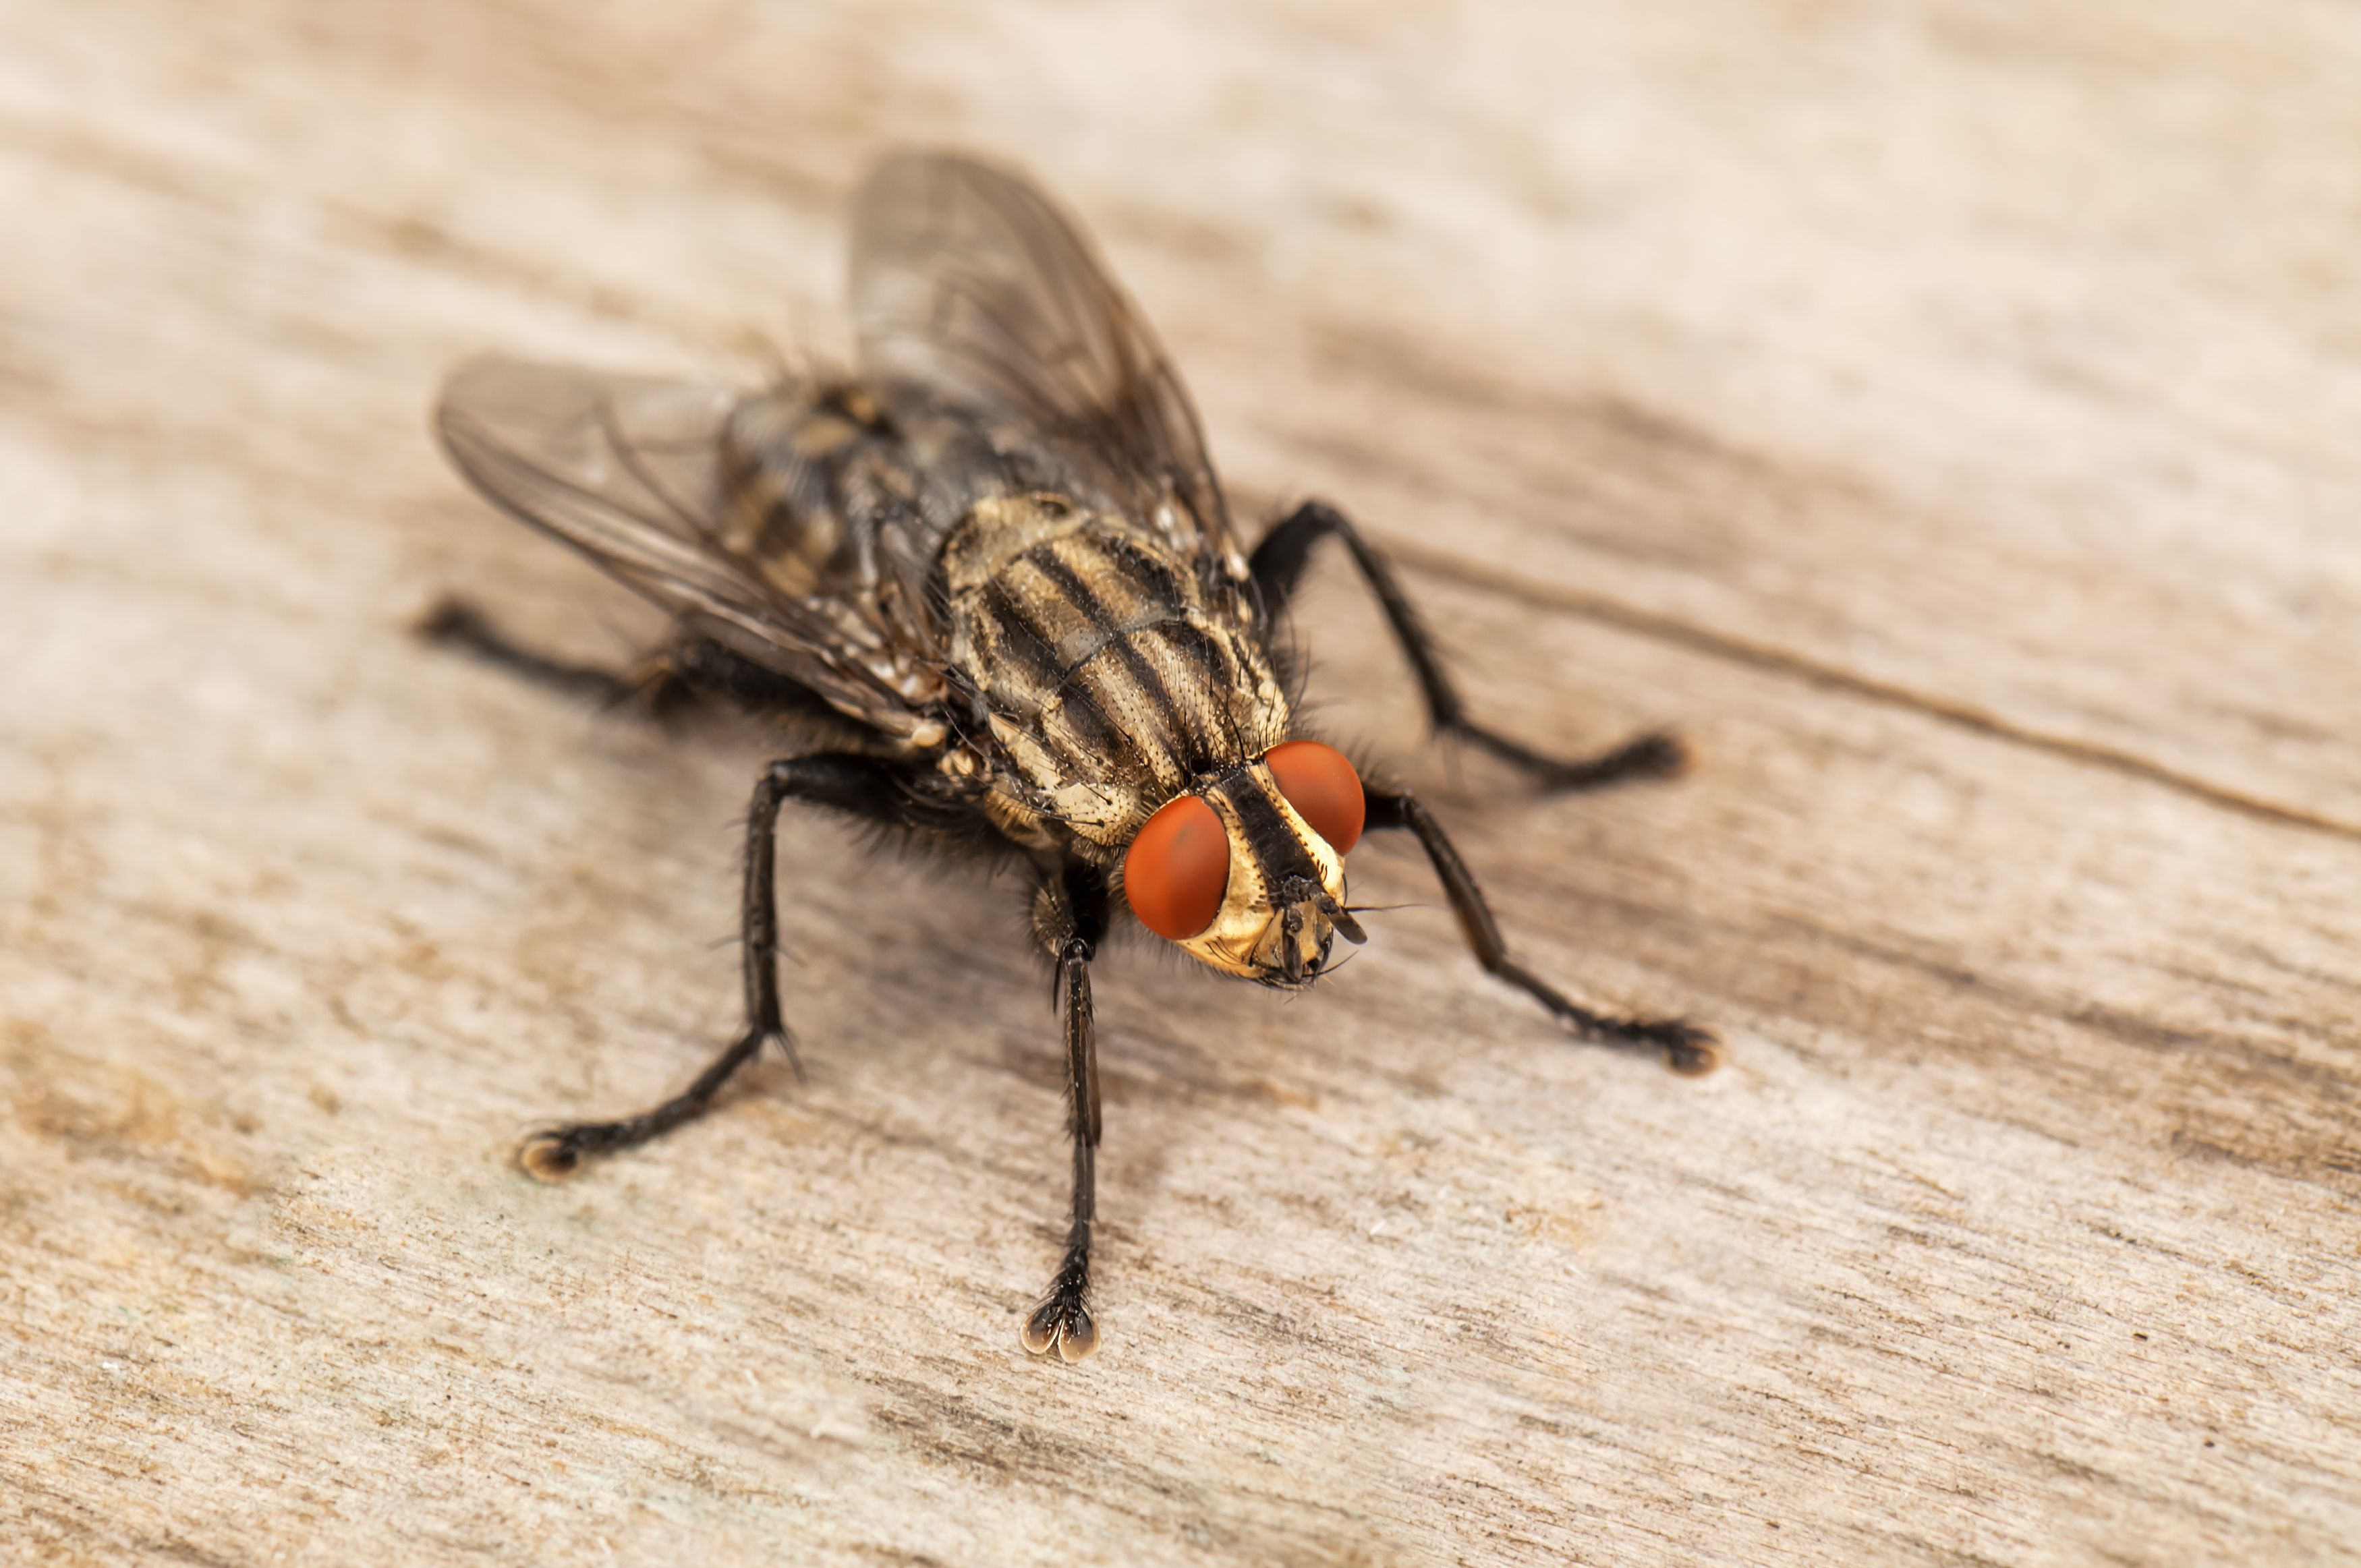 How to Get Rid of Houseflies Naturally